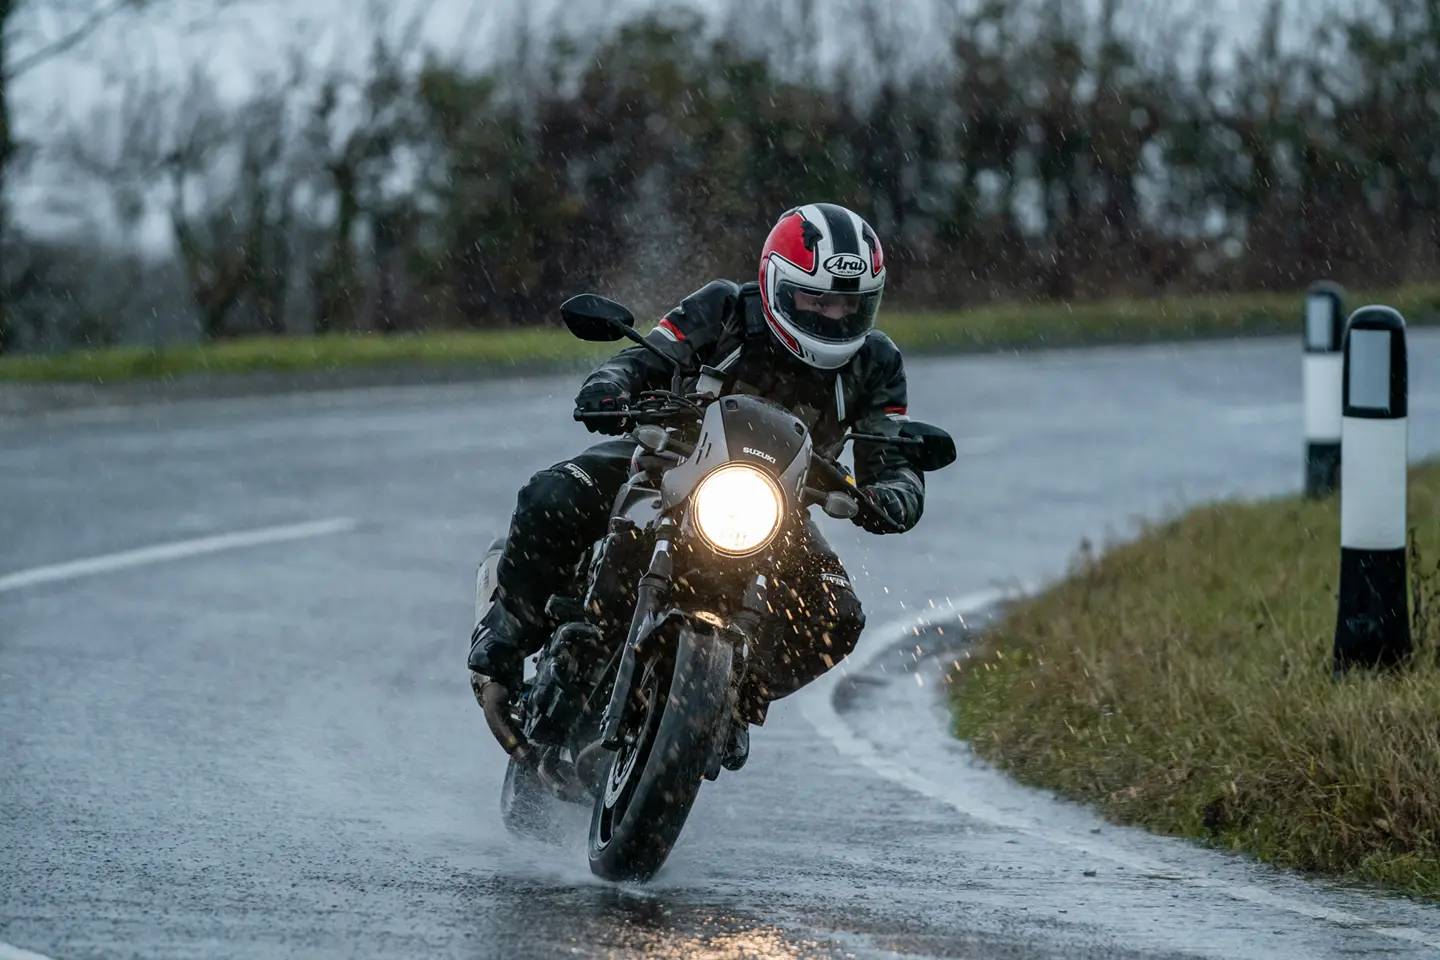 Riding in the Rain: Essential Wet Weather Motorcycle Safety Tips